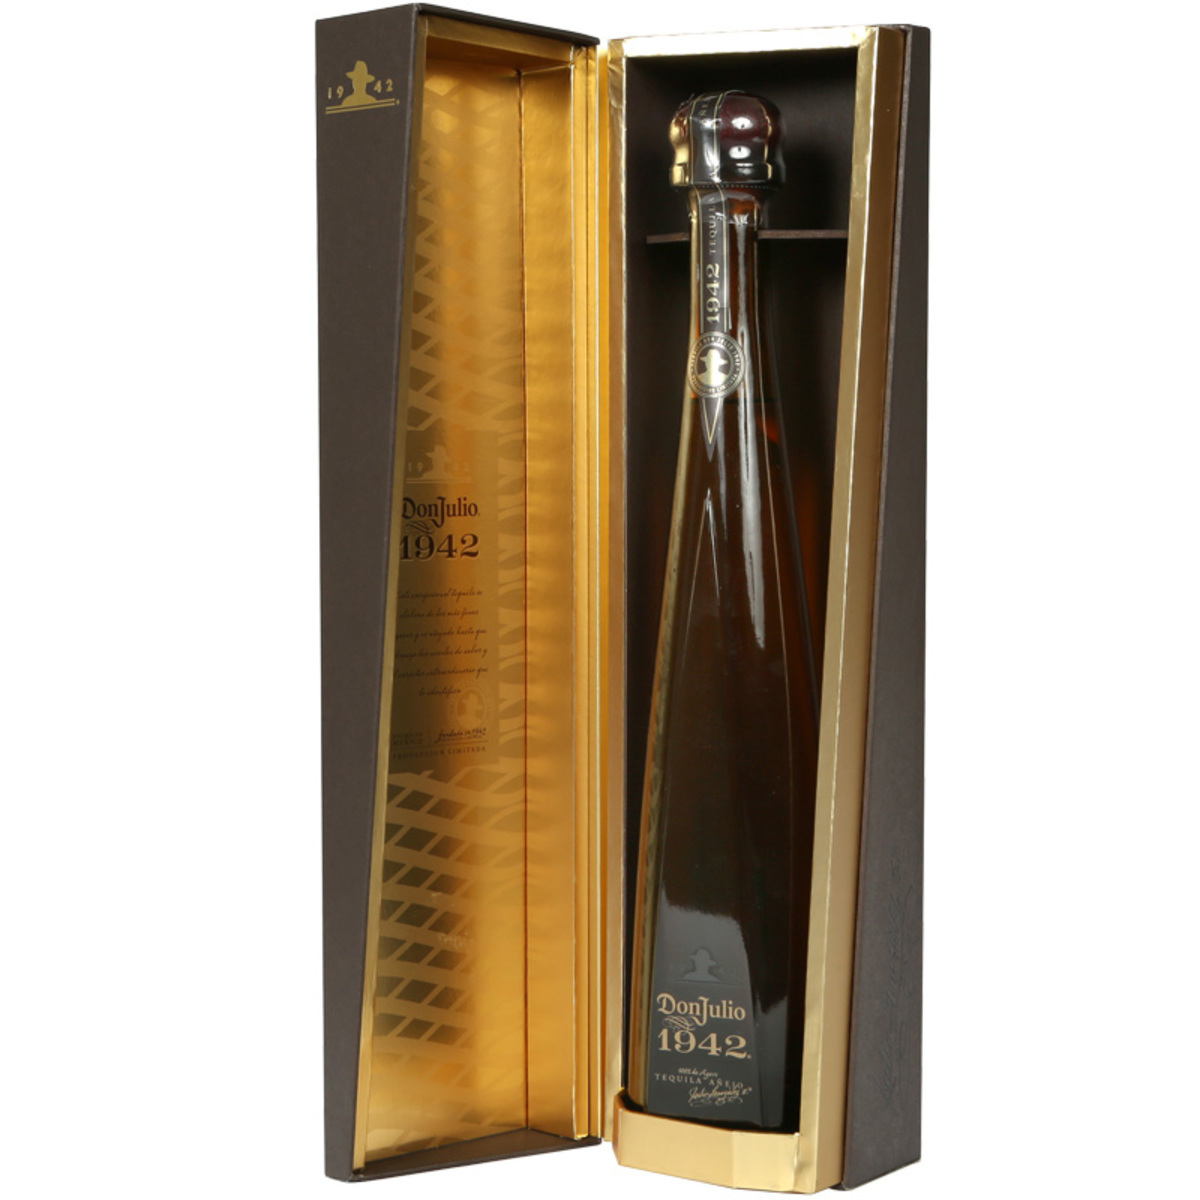 Don Julio 1942 Tequila, 70cl